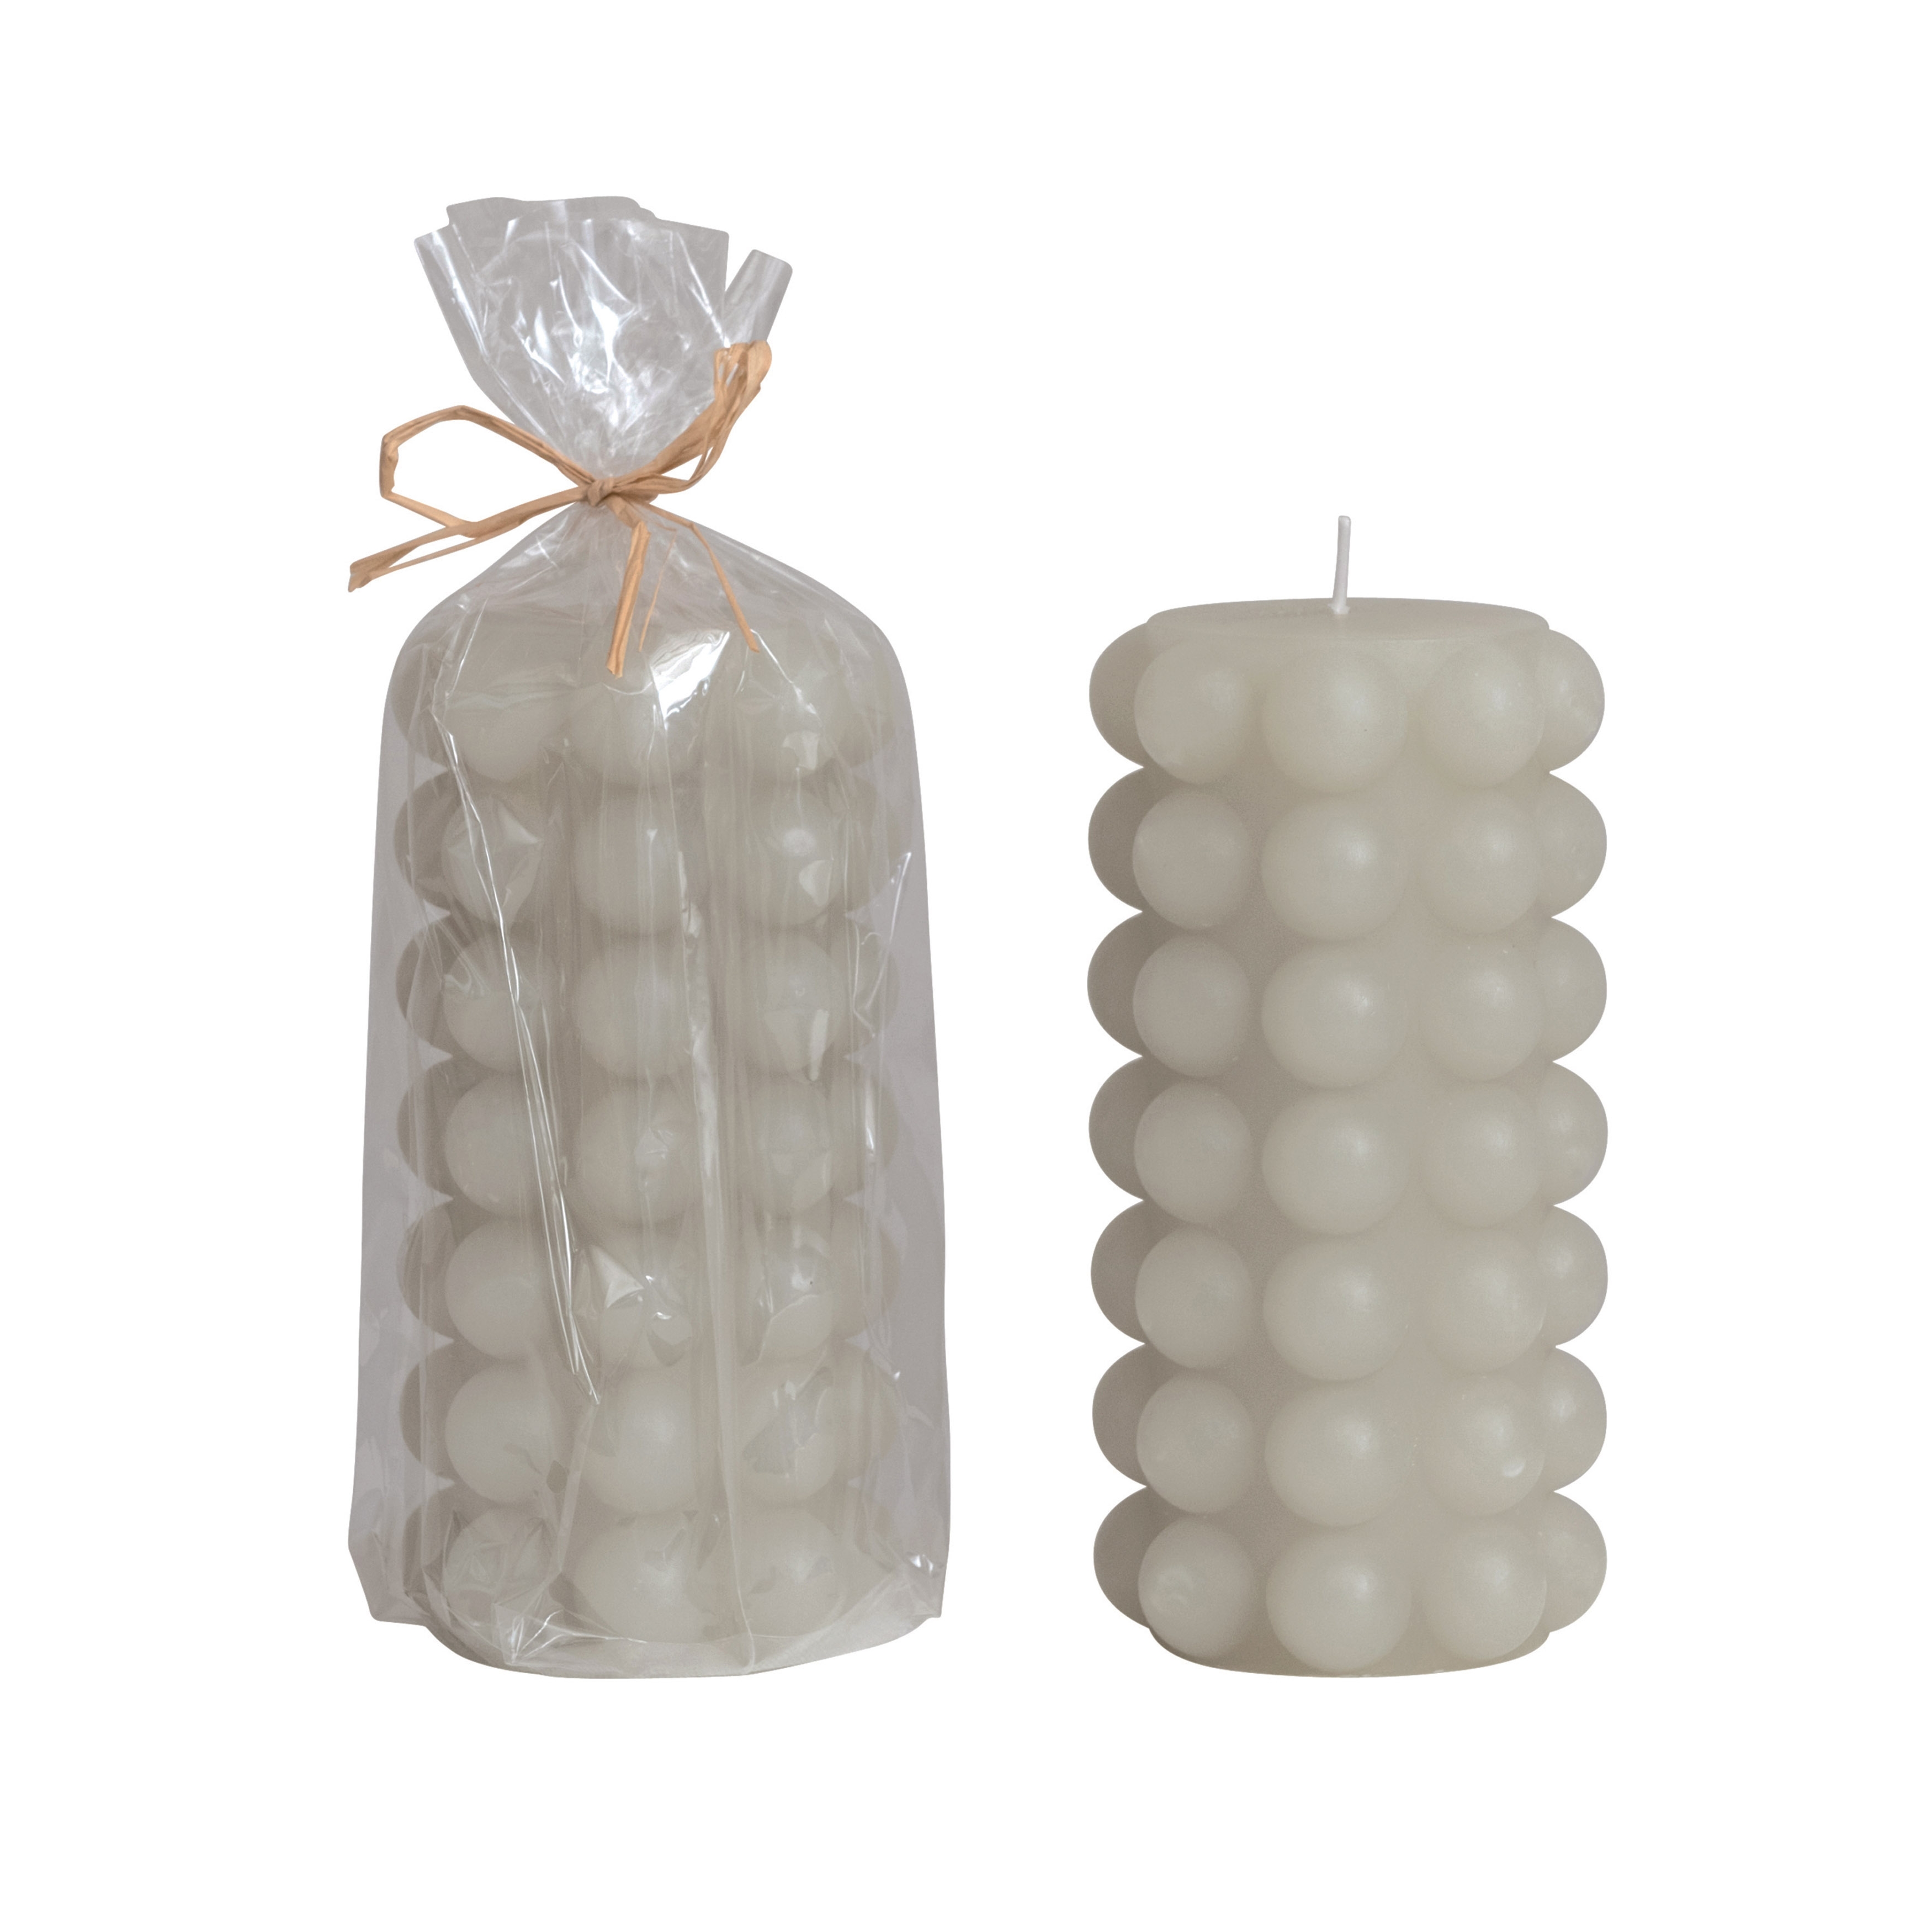  Unscented Hobnail Pillar Candle, Dove Grey - Image 0